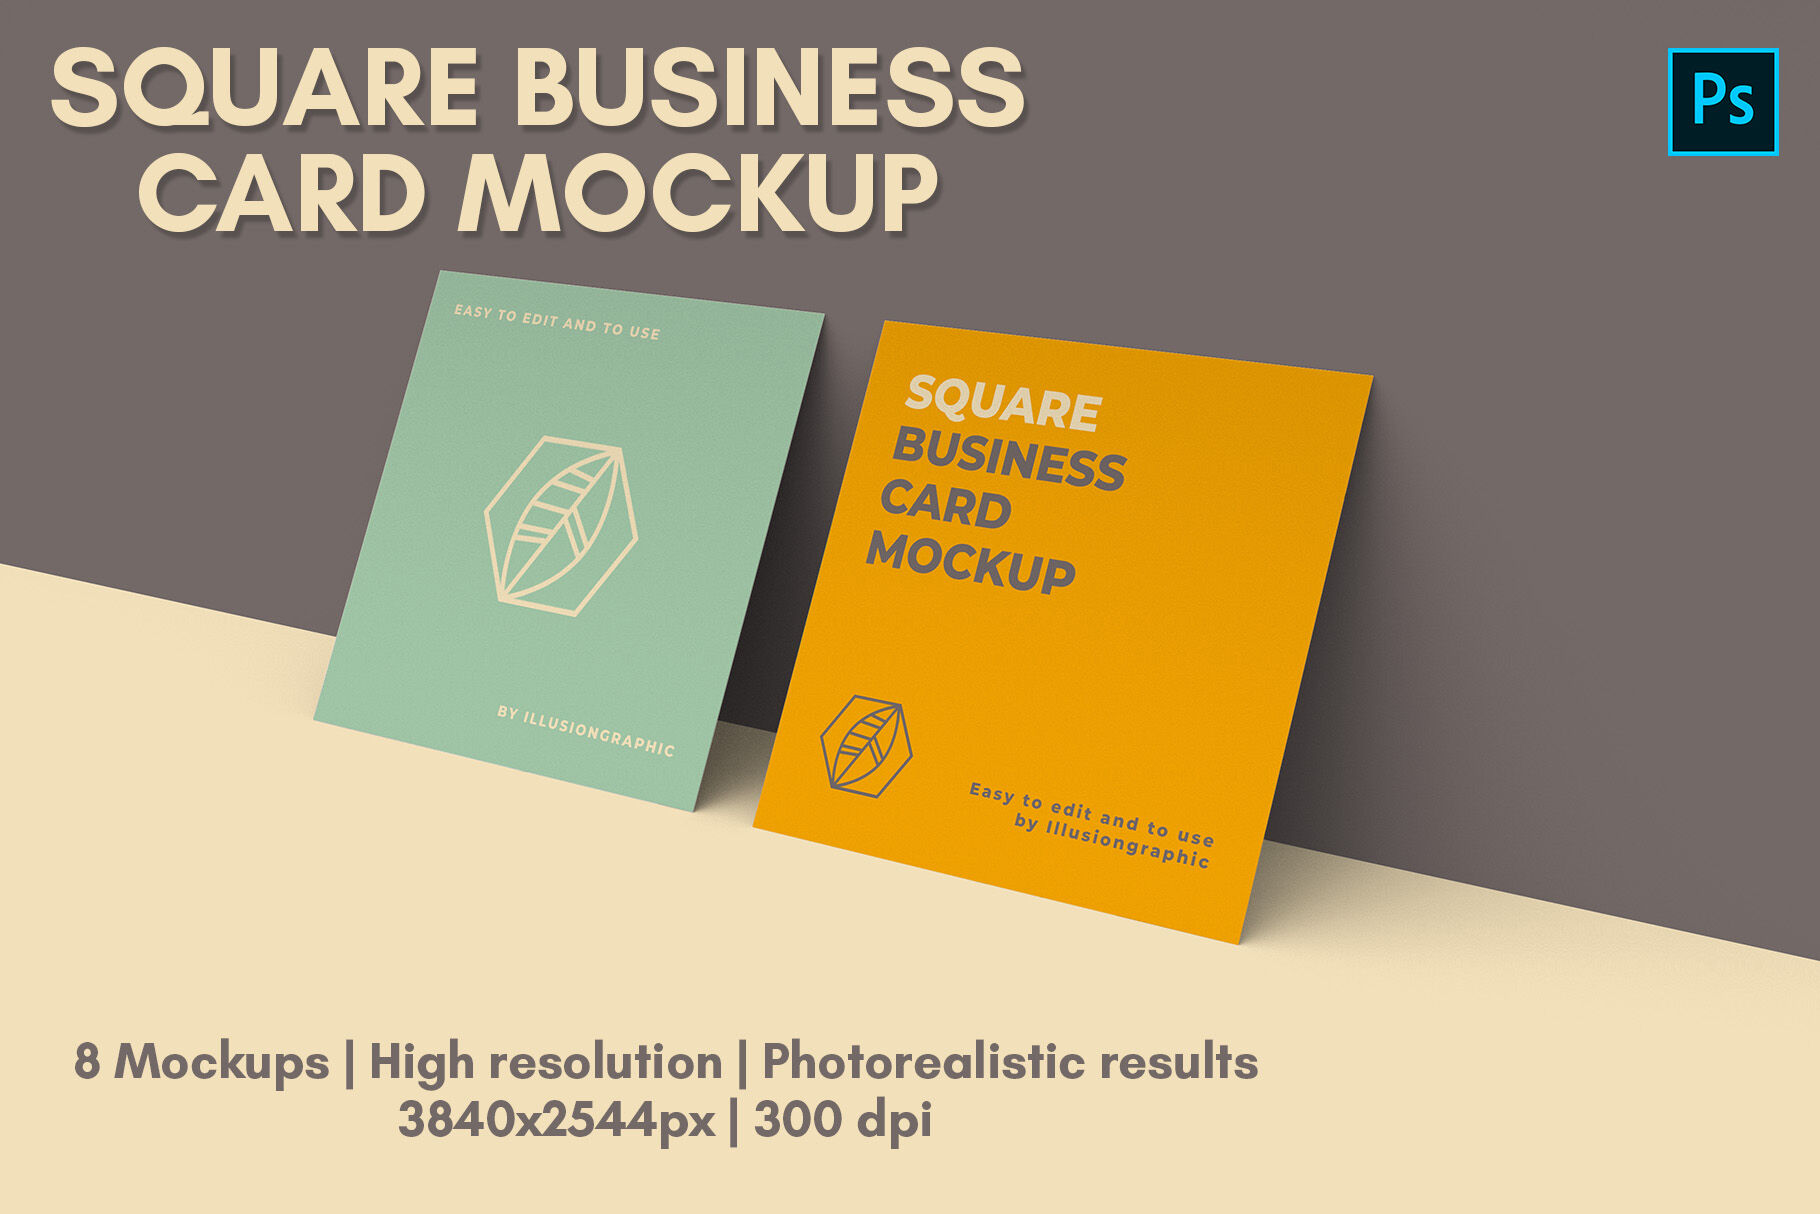 Download Times Square Mockup Psd - Free Mockups | PSD Template ...